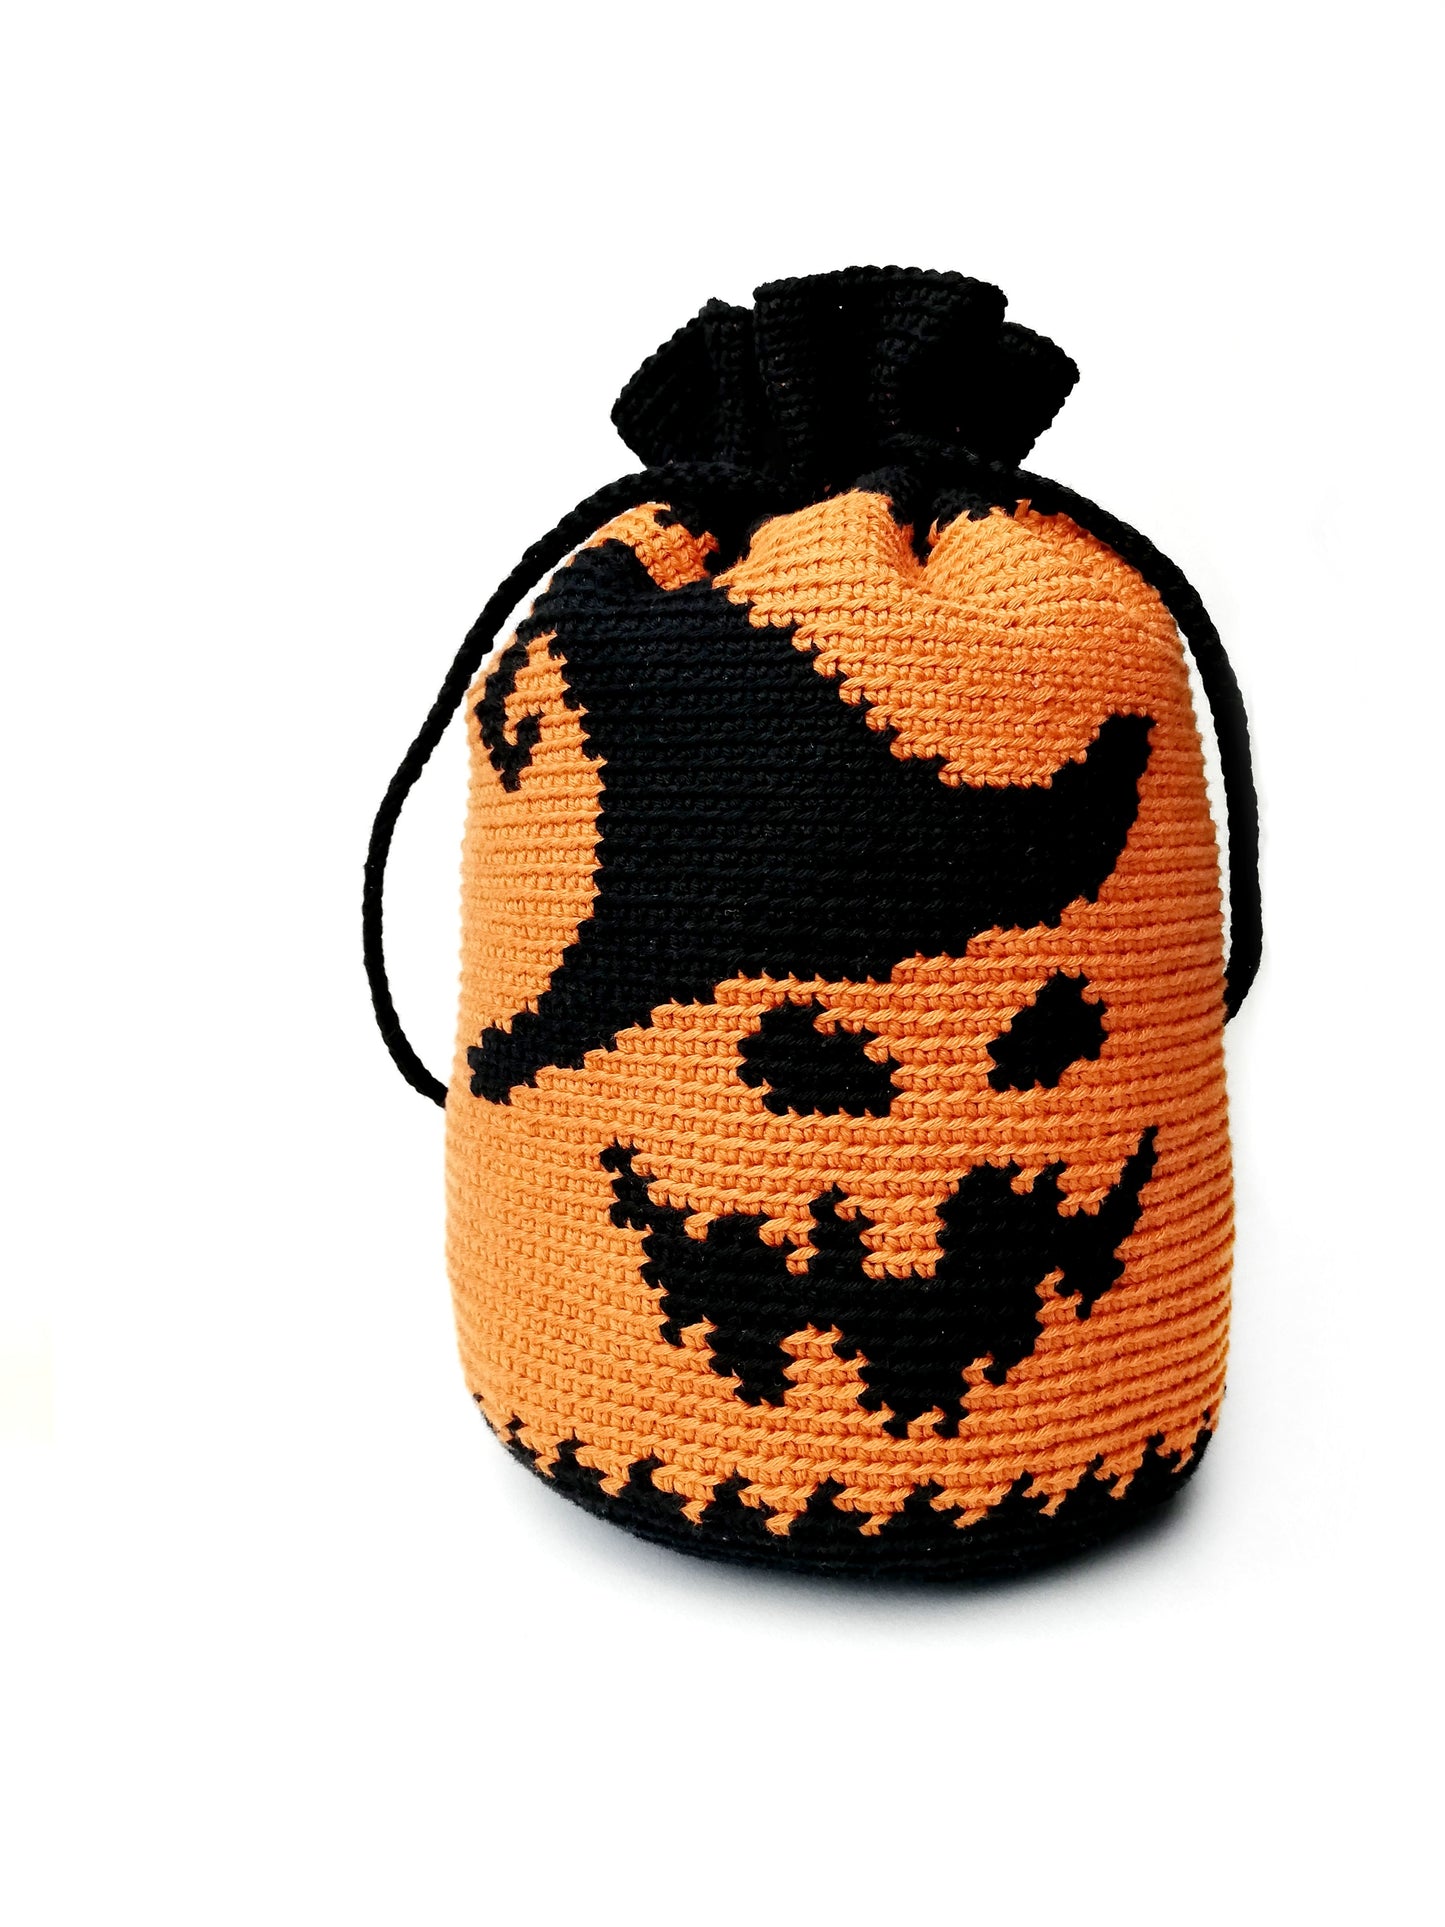 Spooky Halloween bag for candy